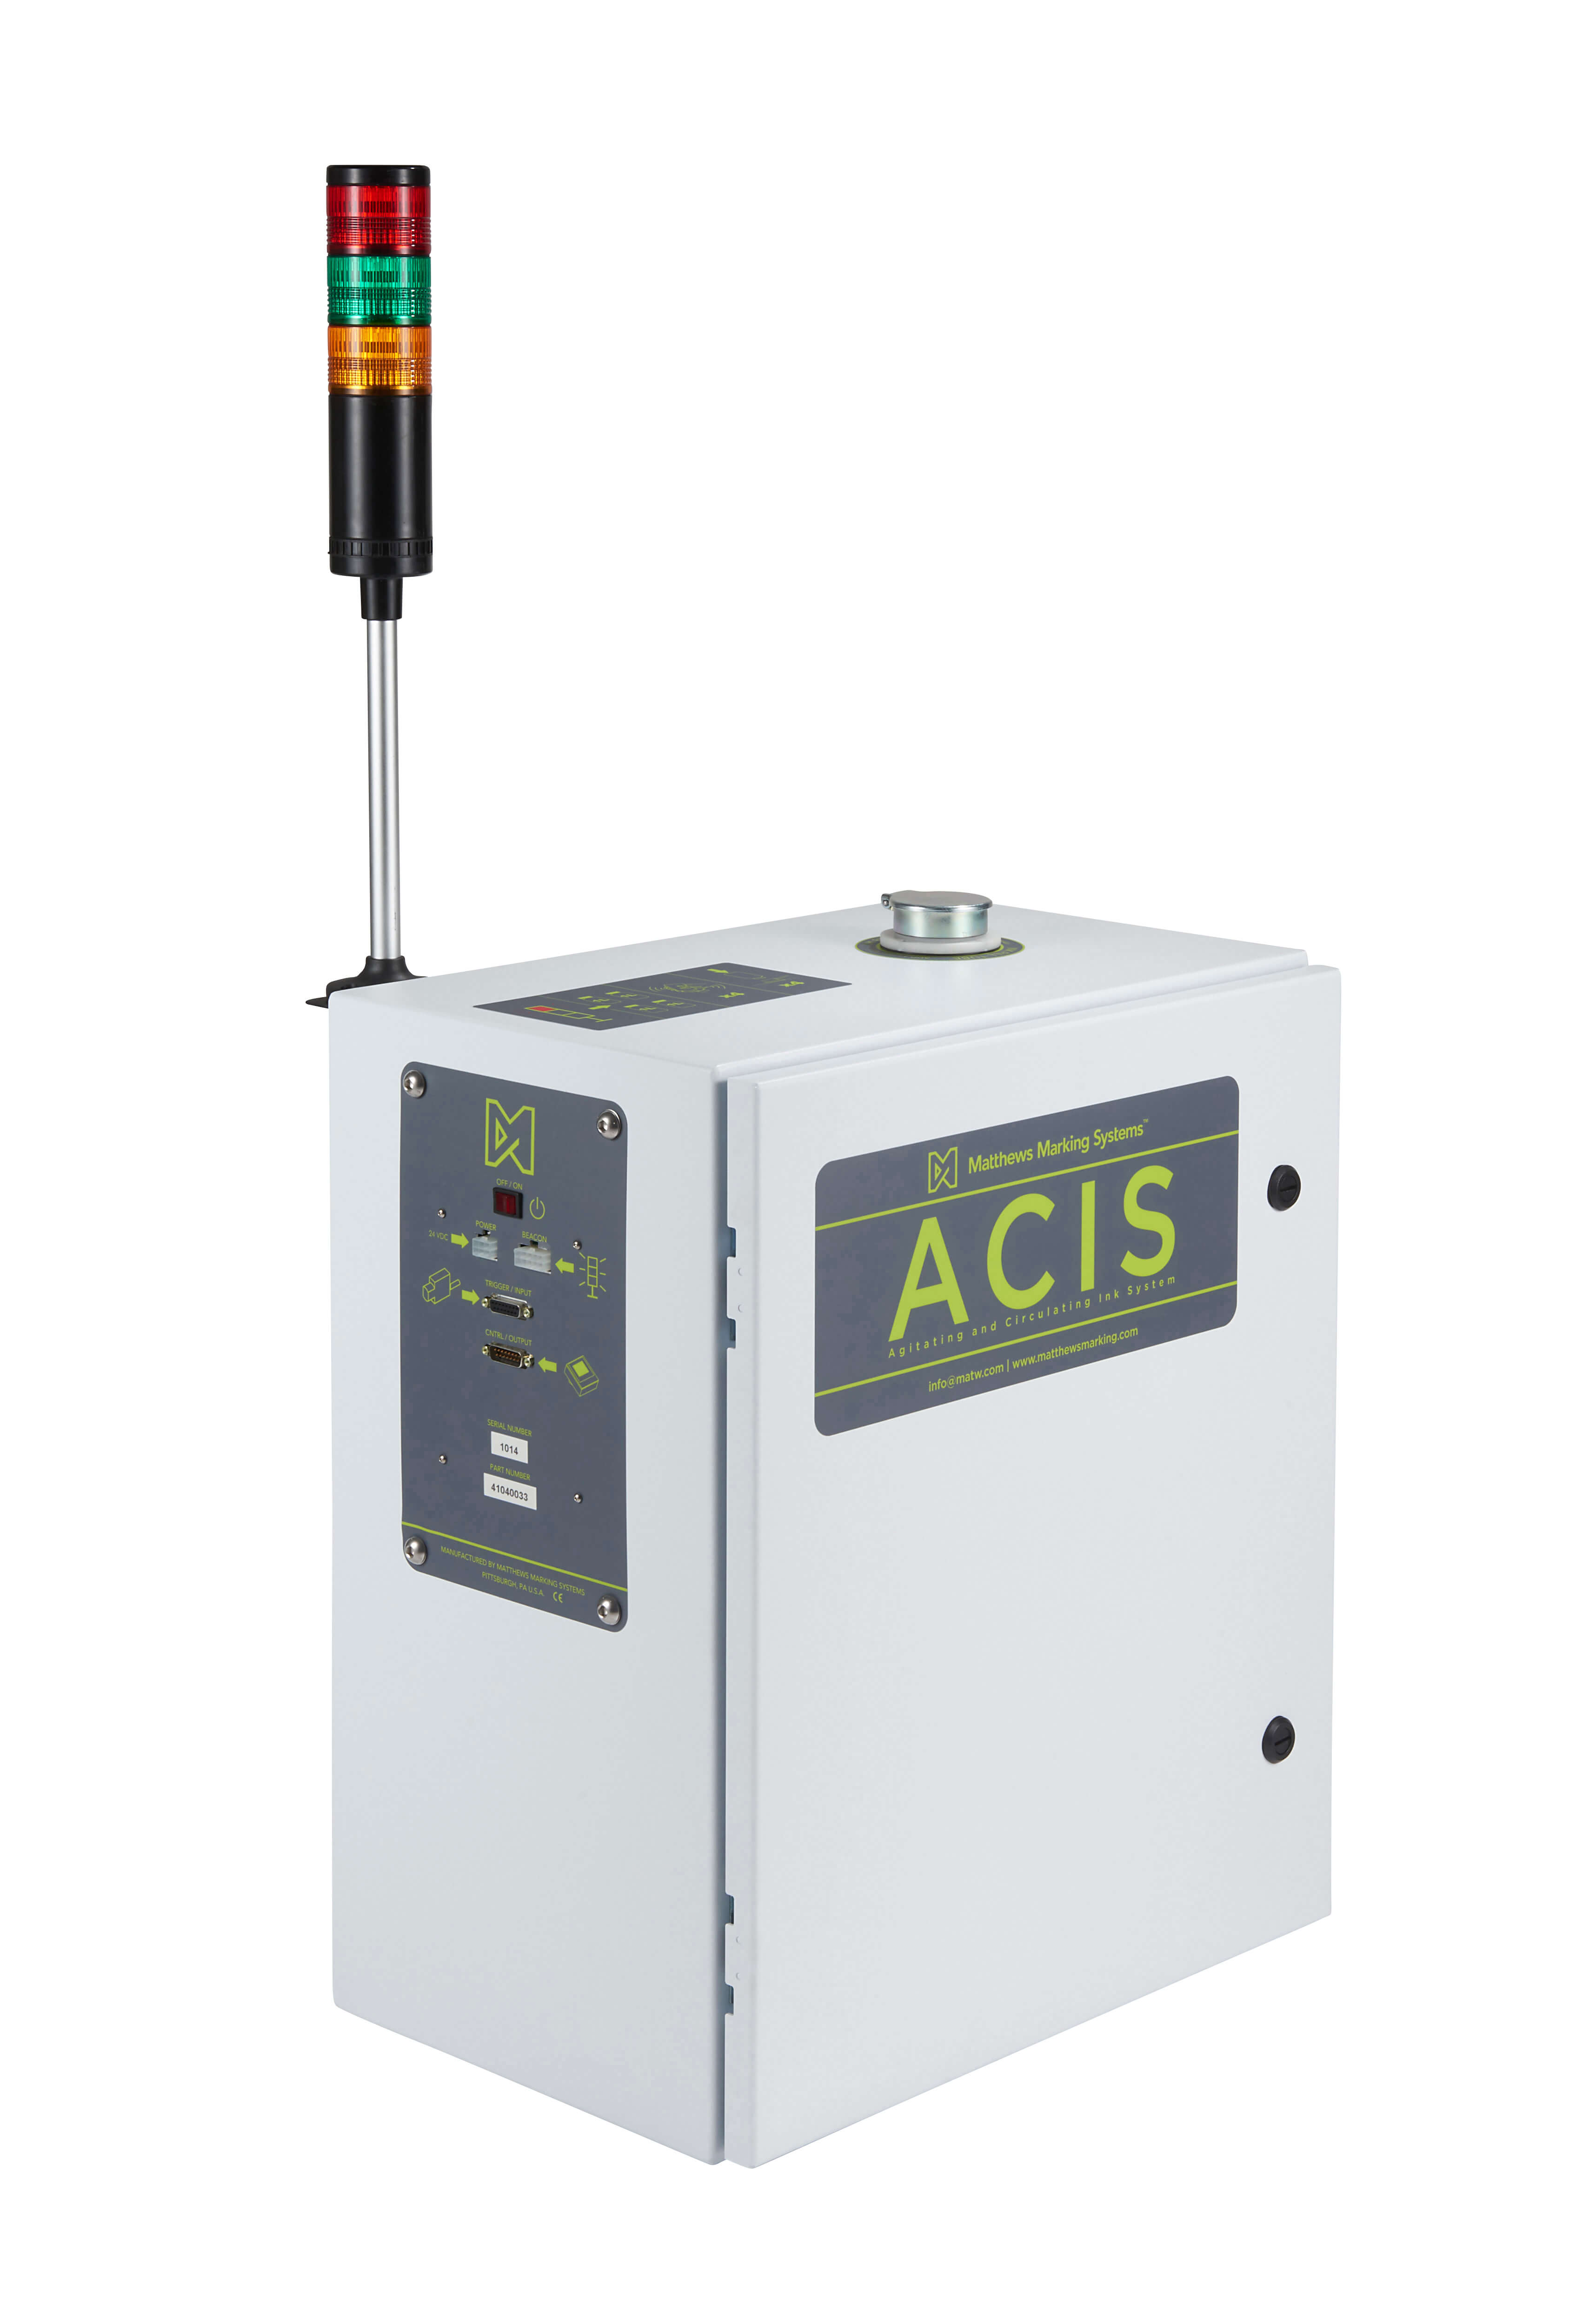 ACIS - tire tread uncured rubber marking and coding ink system